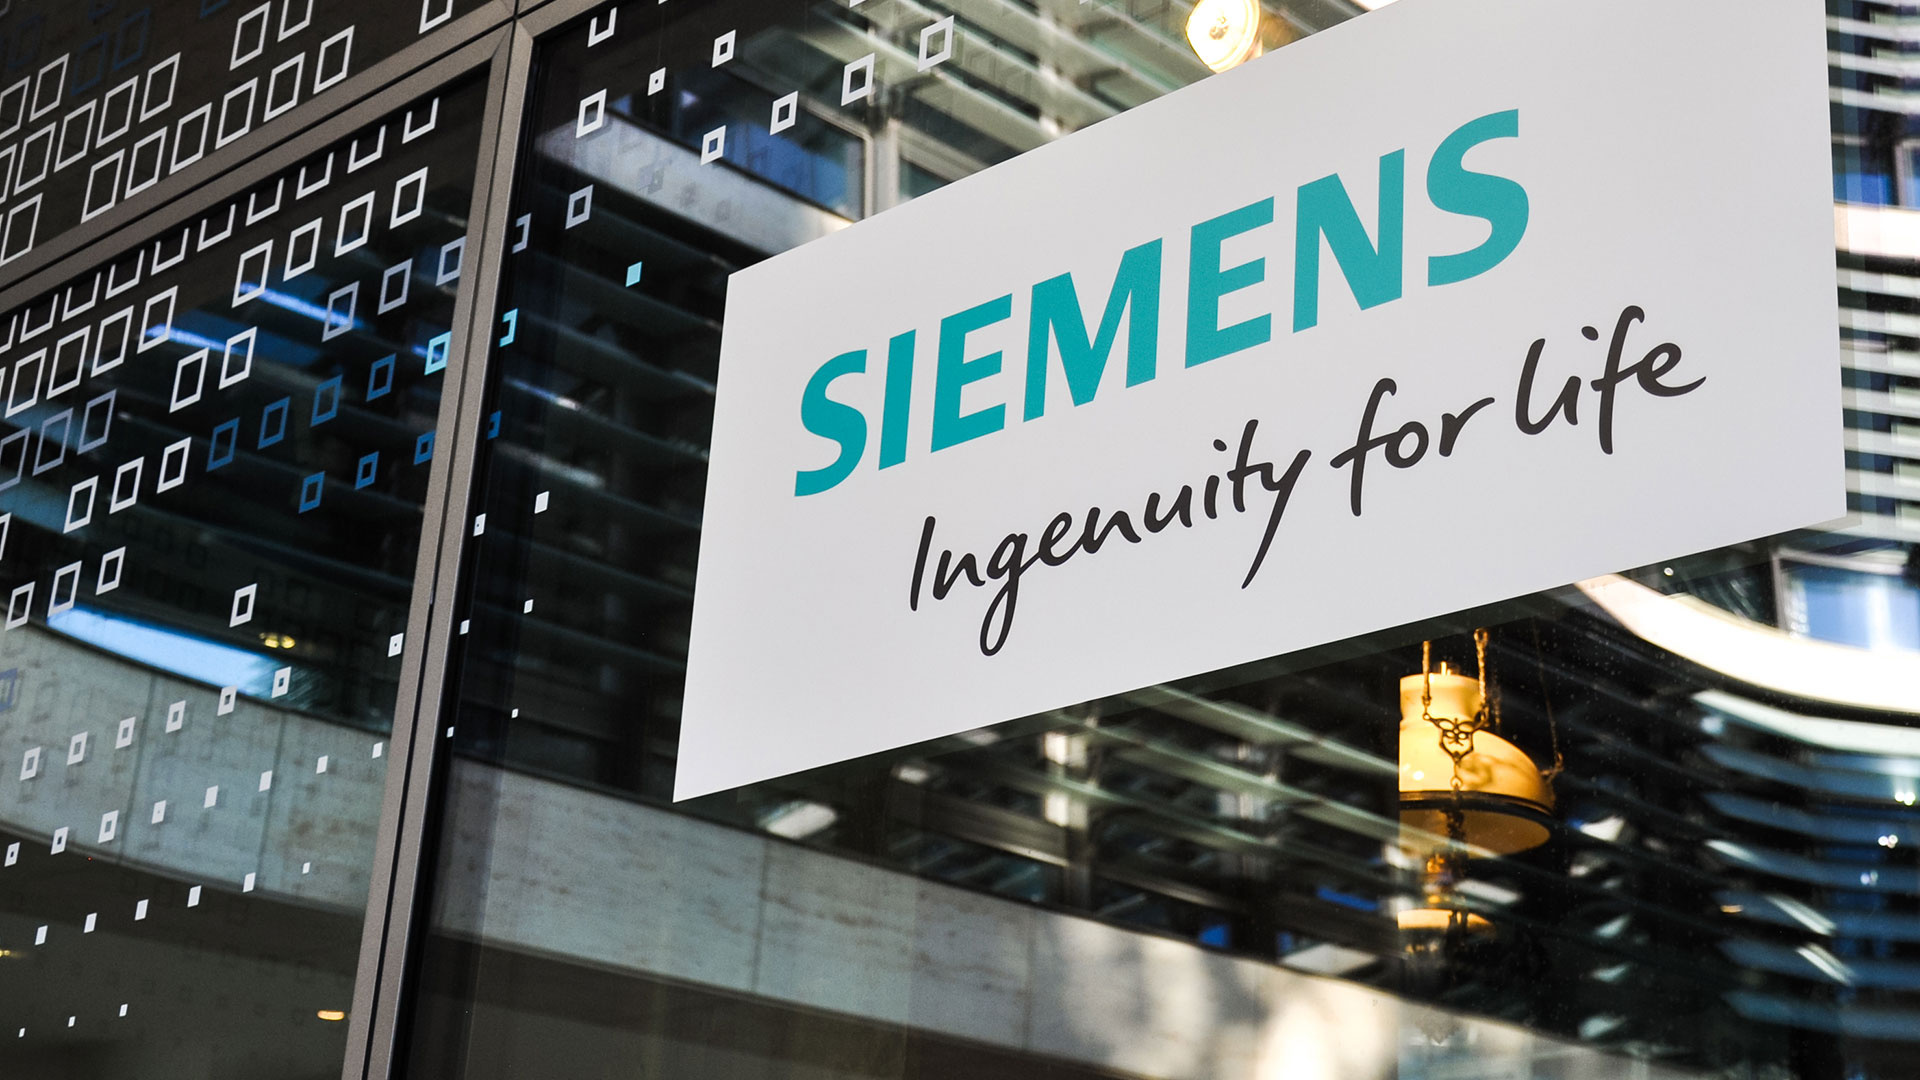 Siemens: Ingenuity for life, Slogan, A 170-year-old industrial engineering giant. 1920x1080 Full HD Background.